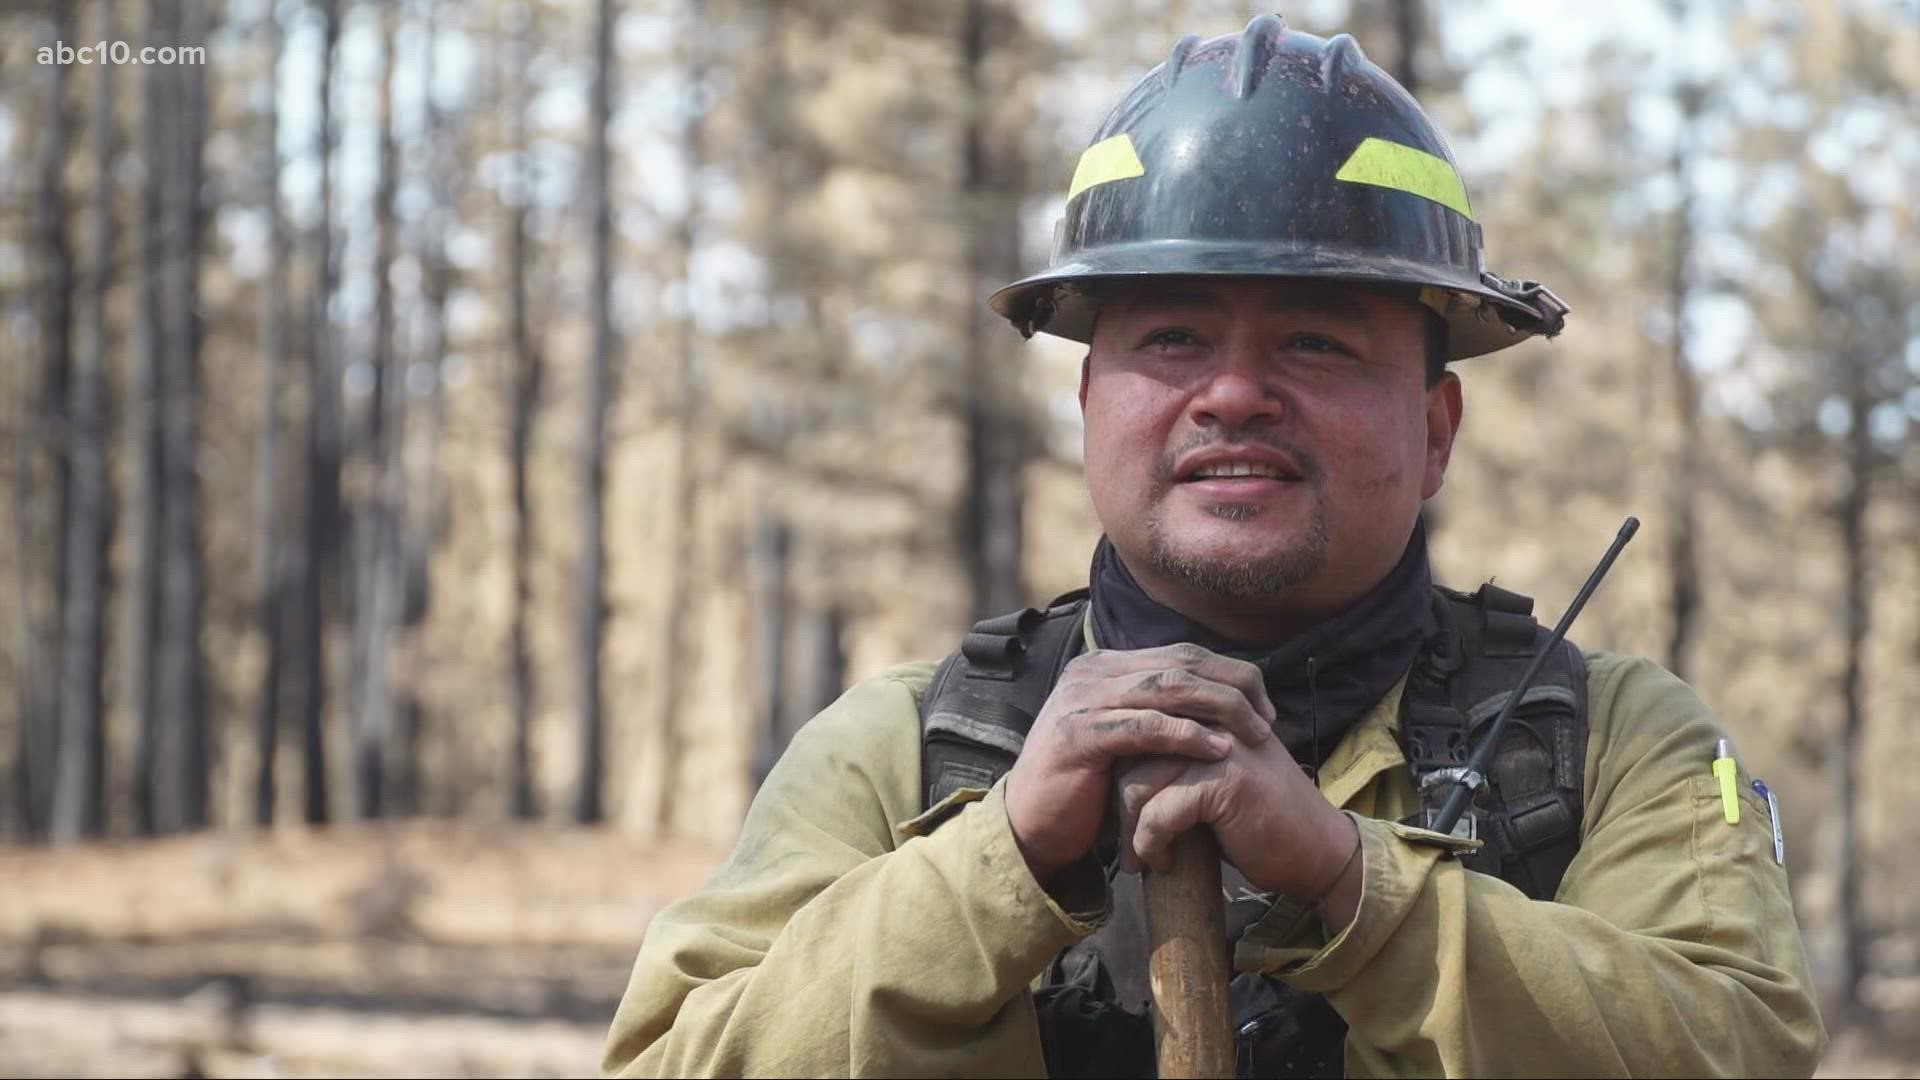 The bomberos are Mexican nationals who are trained to fight fires. Many have come to the US to help battle the Dixie Fire.